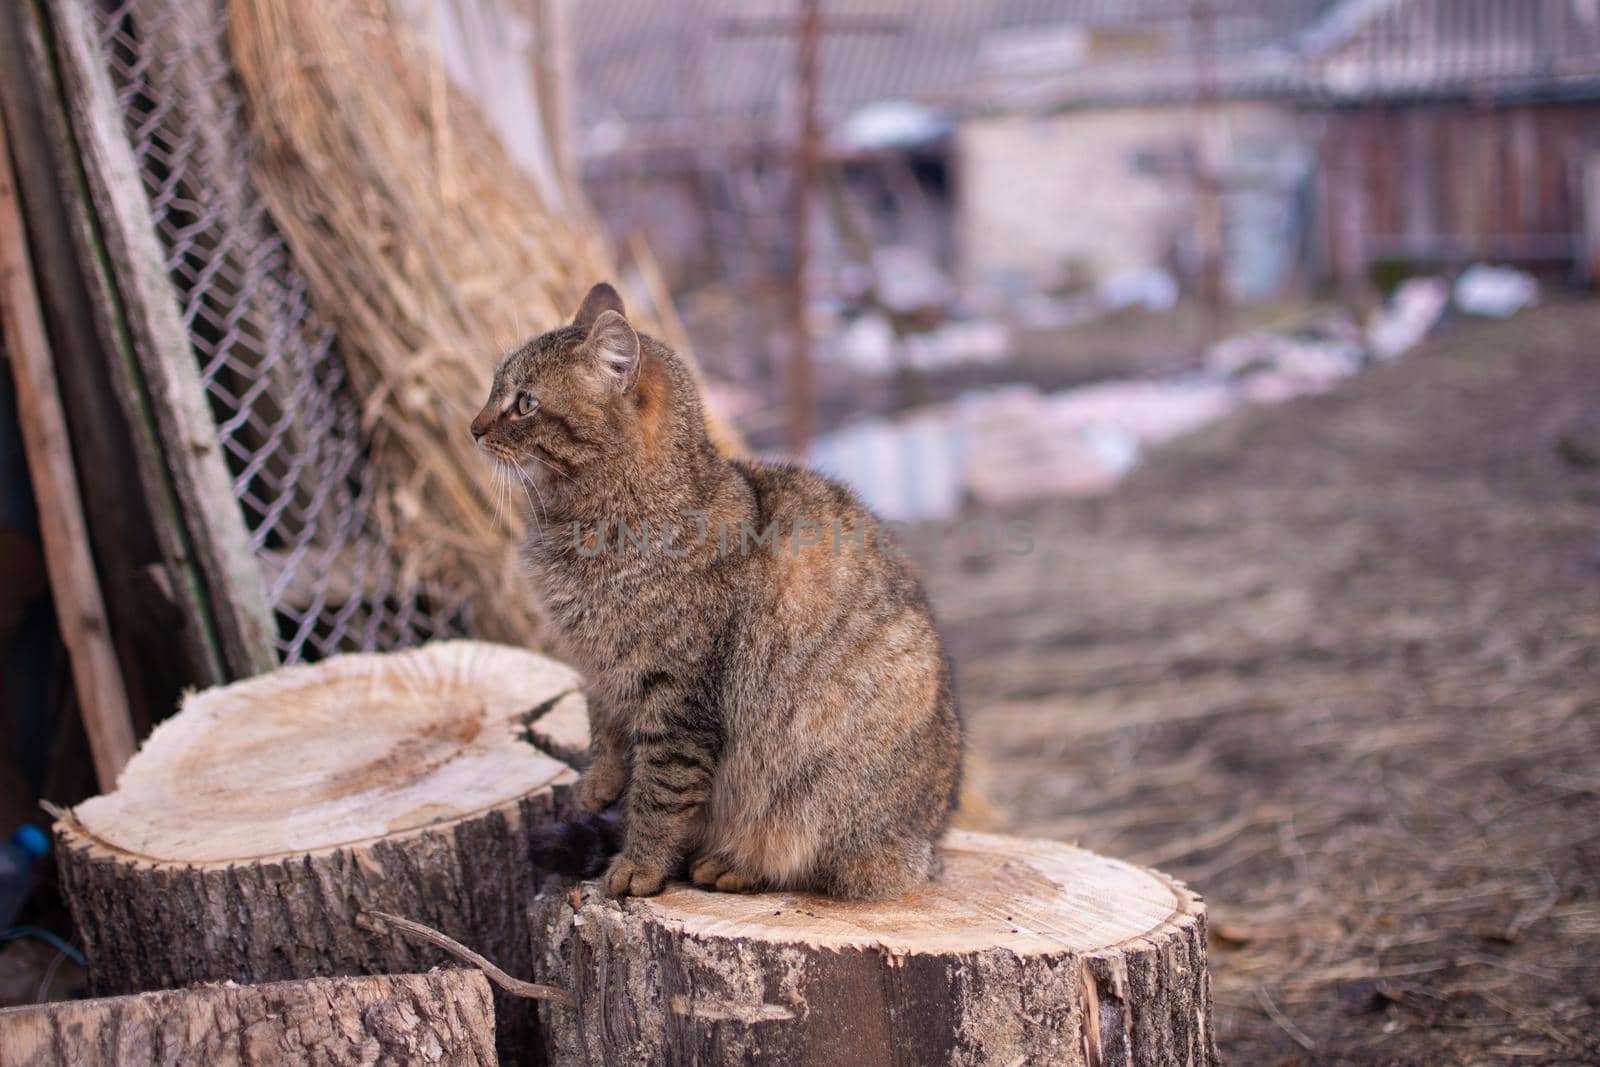 The cat is sitting on a wooden log. Side view.